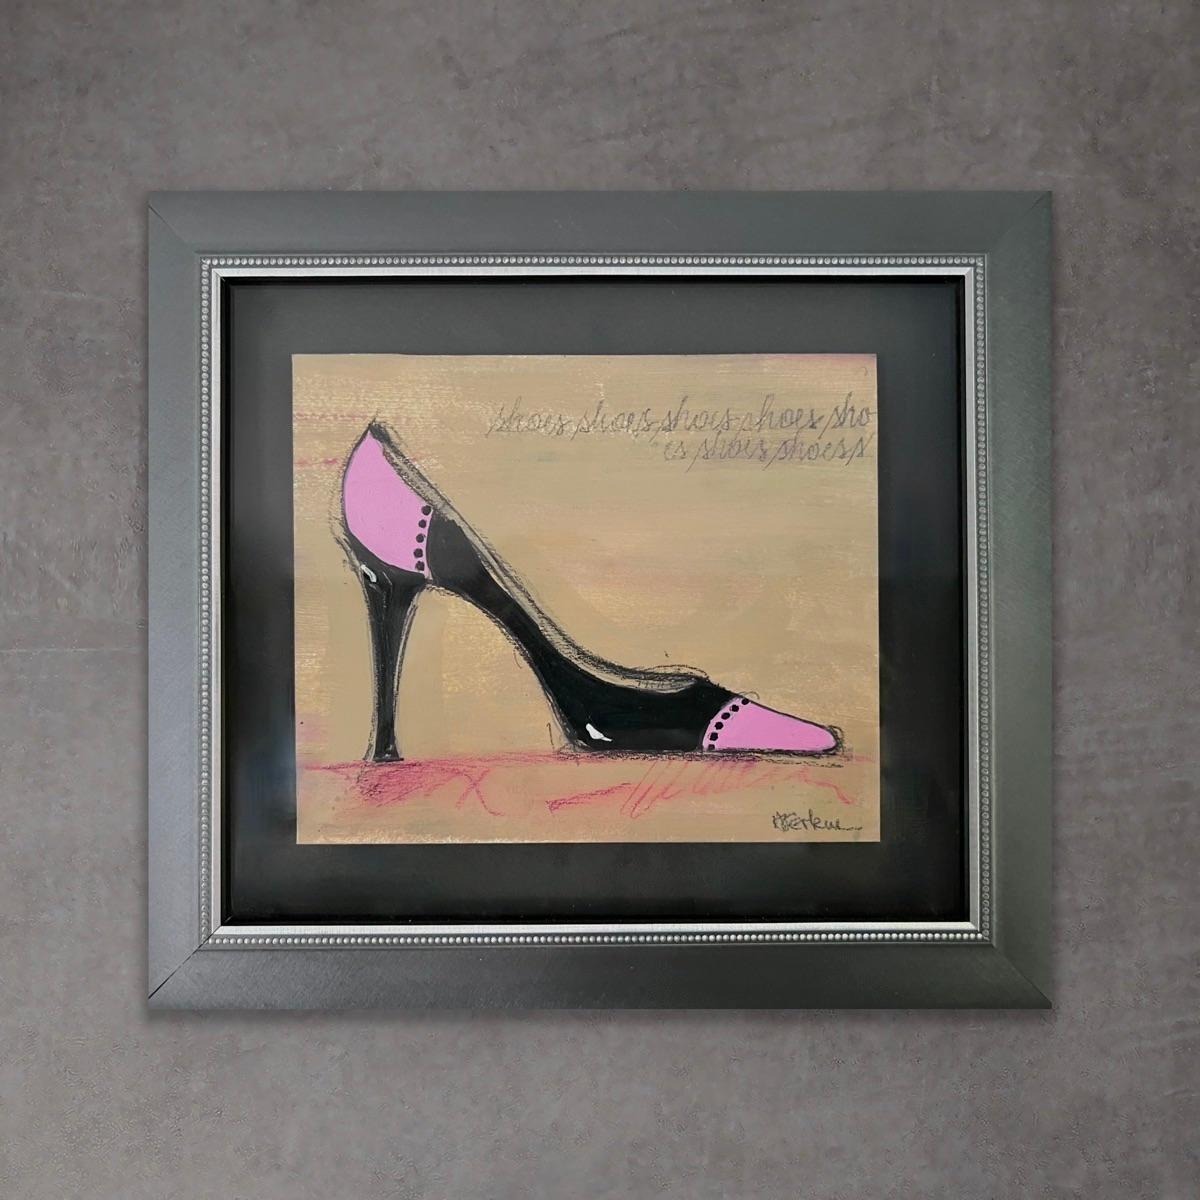 I Love Shoes -  (8.25”x9.25”, Shoe Series, Pink And Black Shoe, Framed) - Contemporary Art by Andrea Stajan-Ferkul